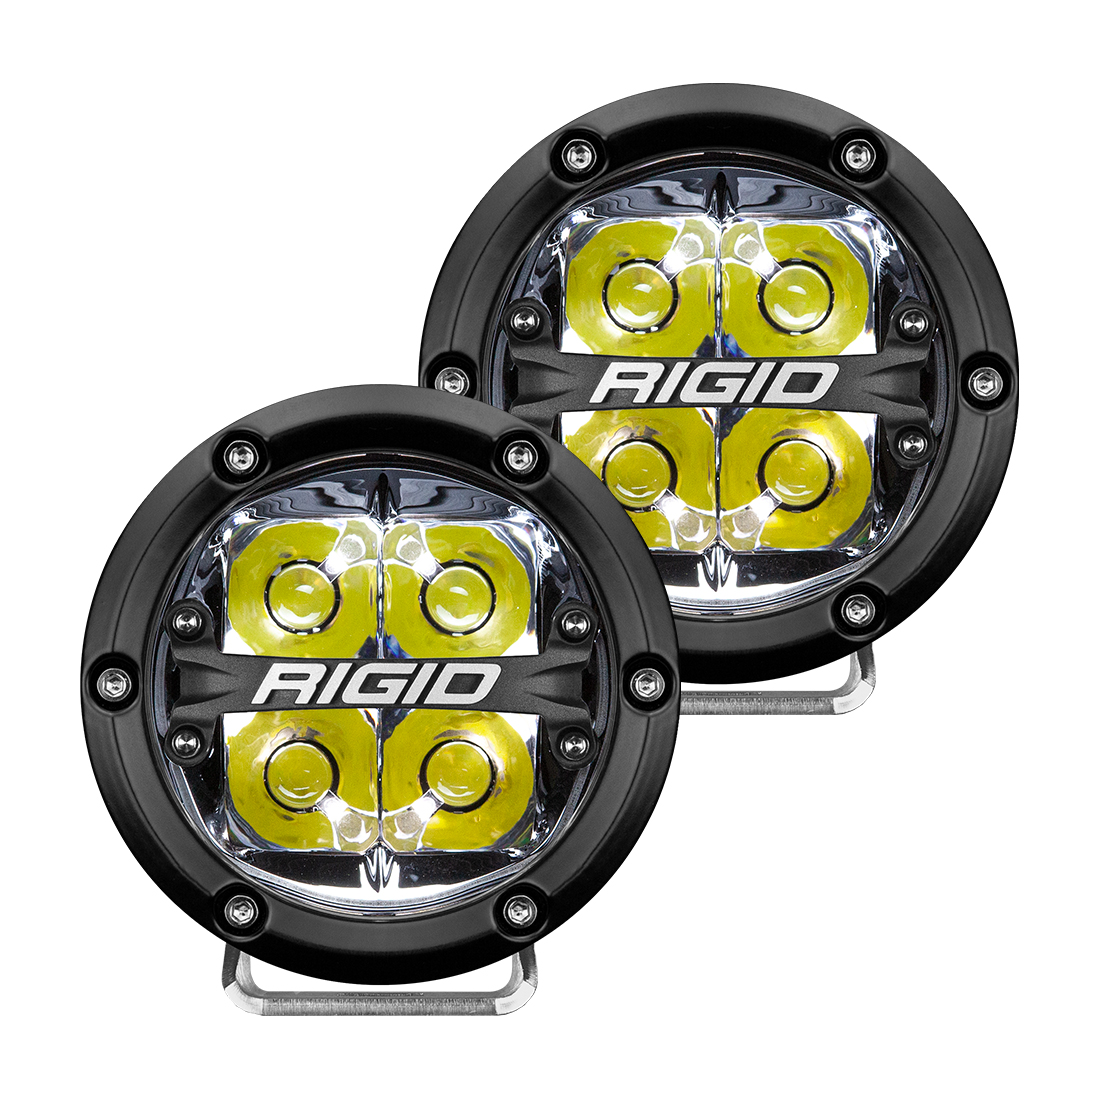 Rigid Industries 360-Series 4 Inch Led Off-Road Spot Beam White Backlight Pair